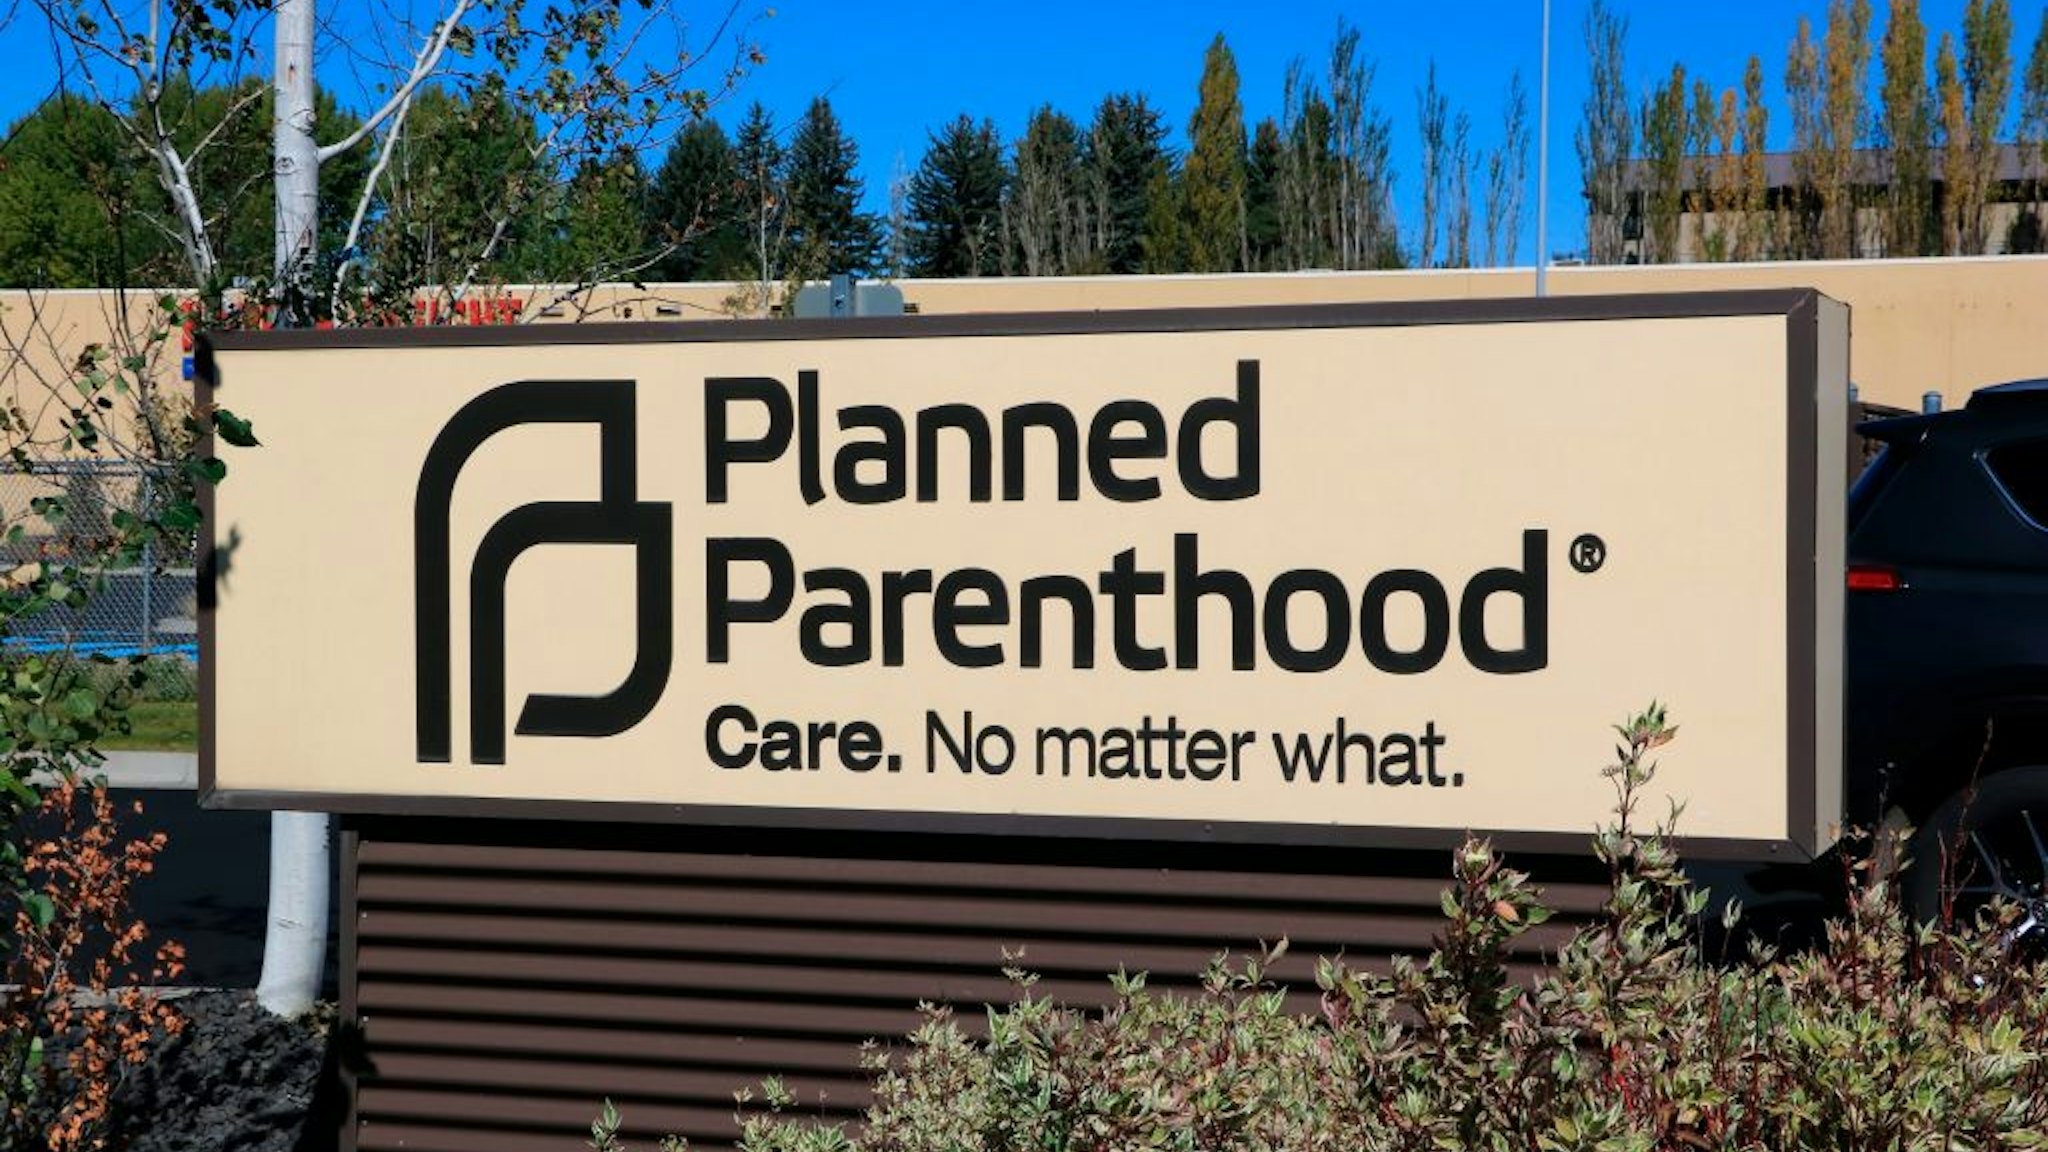 Sign at entry of Planned Parenthood clinic, This clinic is in Pullman Washington. (Photo by: Don and Melinda Crawford/UCG/Universal Images Group via Getty Images)